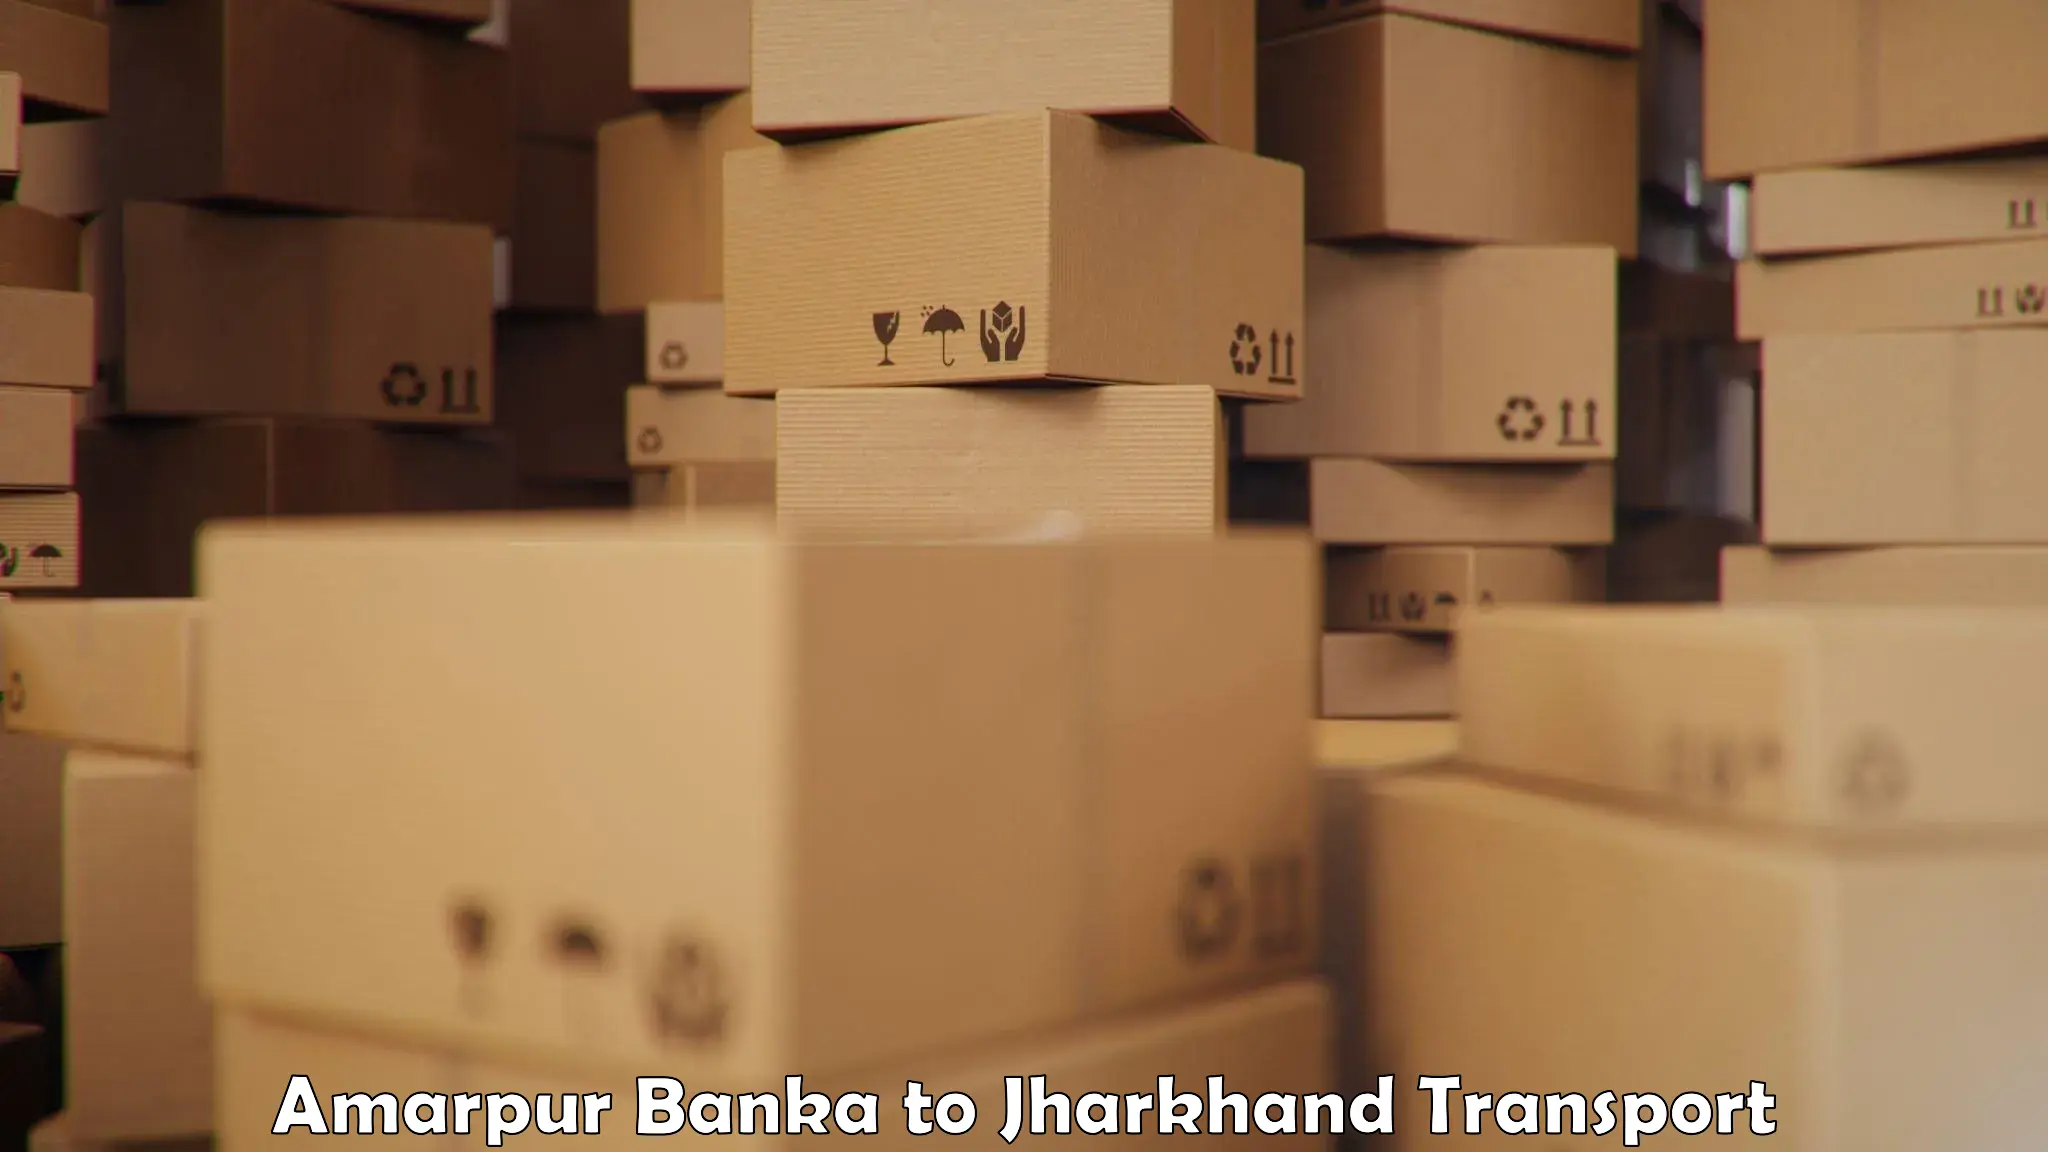 Goods delivery service Amarpur Banka to Ranchi